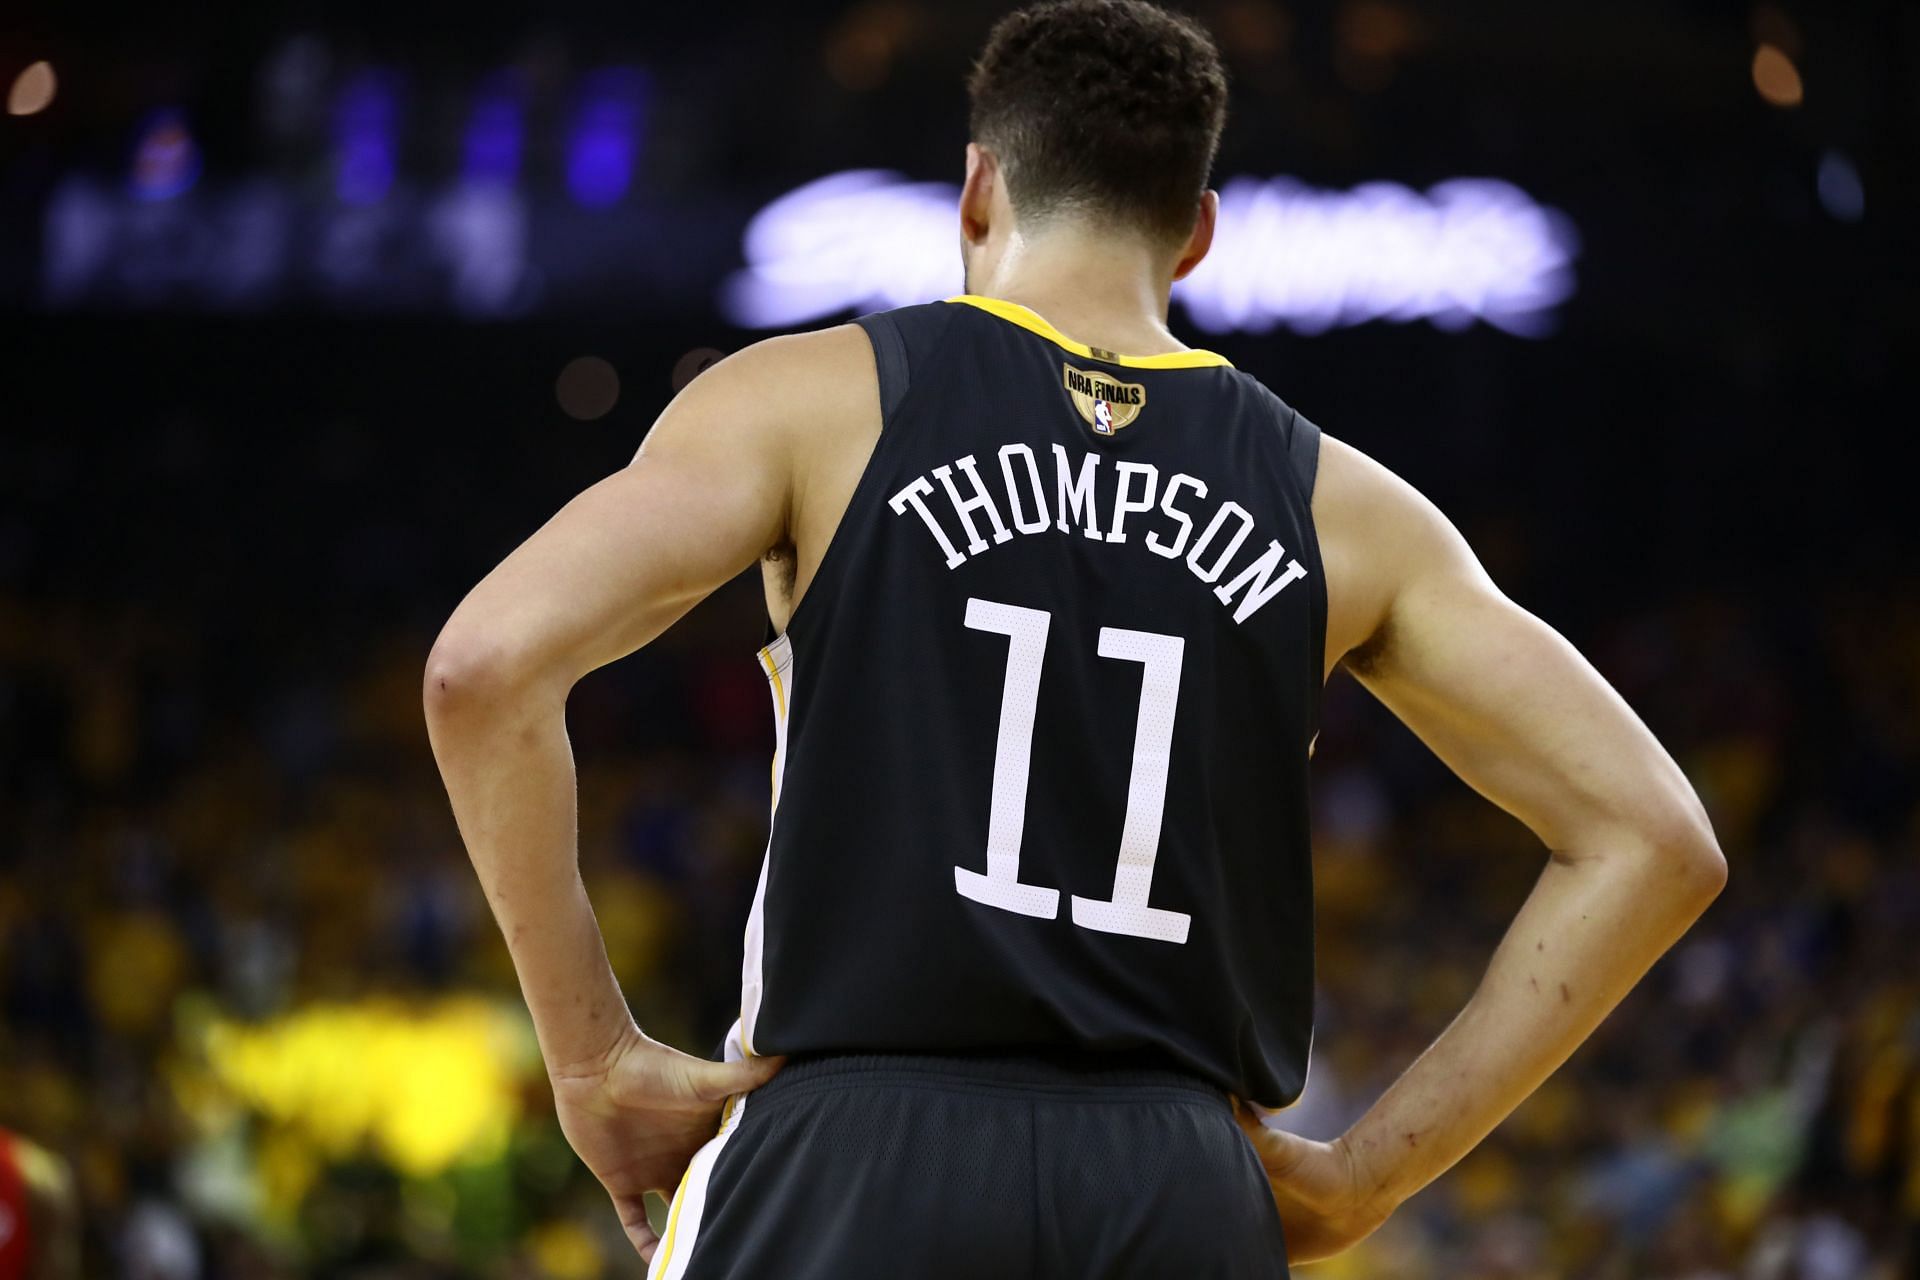 Golden State Warriors star Klay Thompson continues to be a popular personality around the NBA